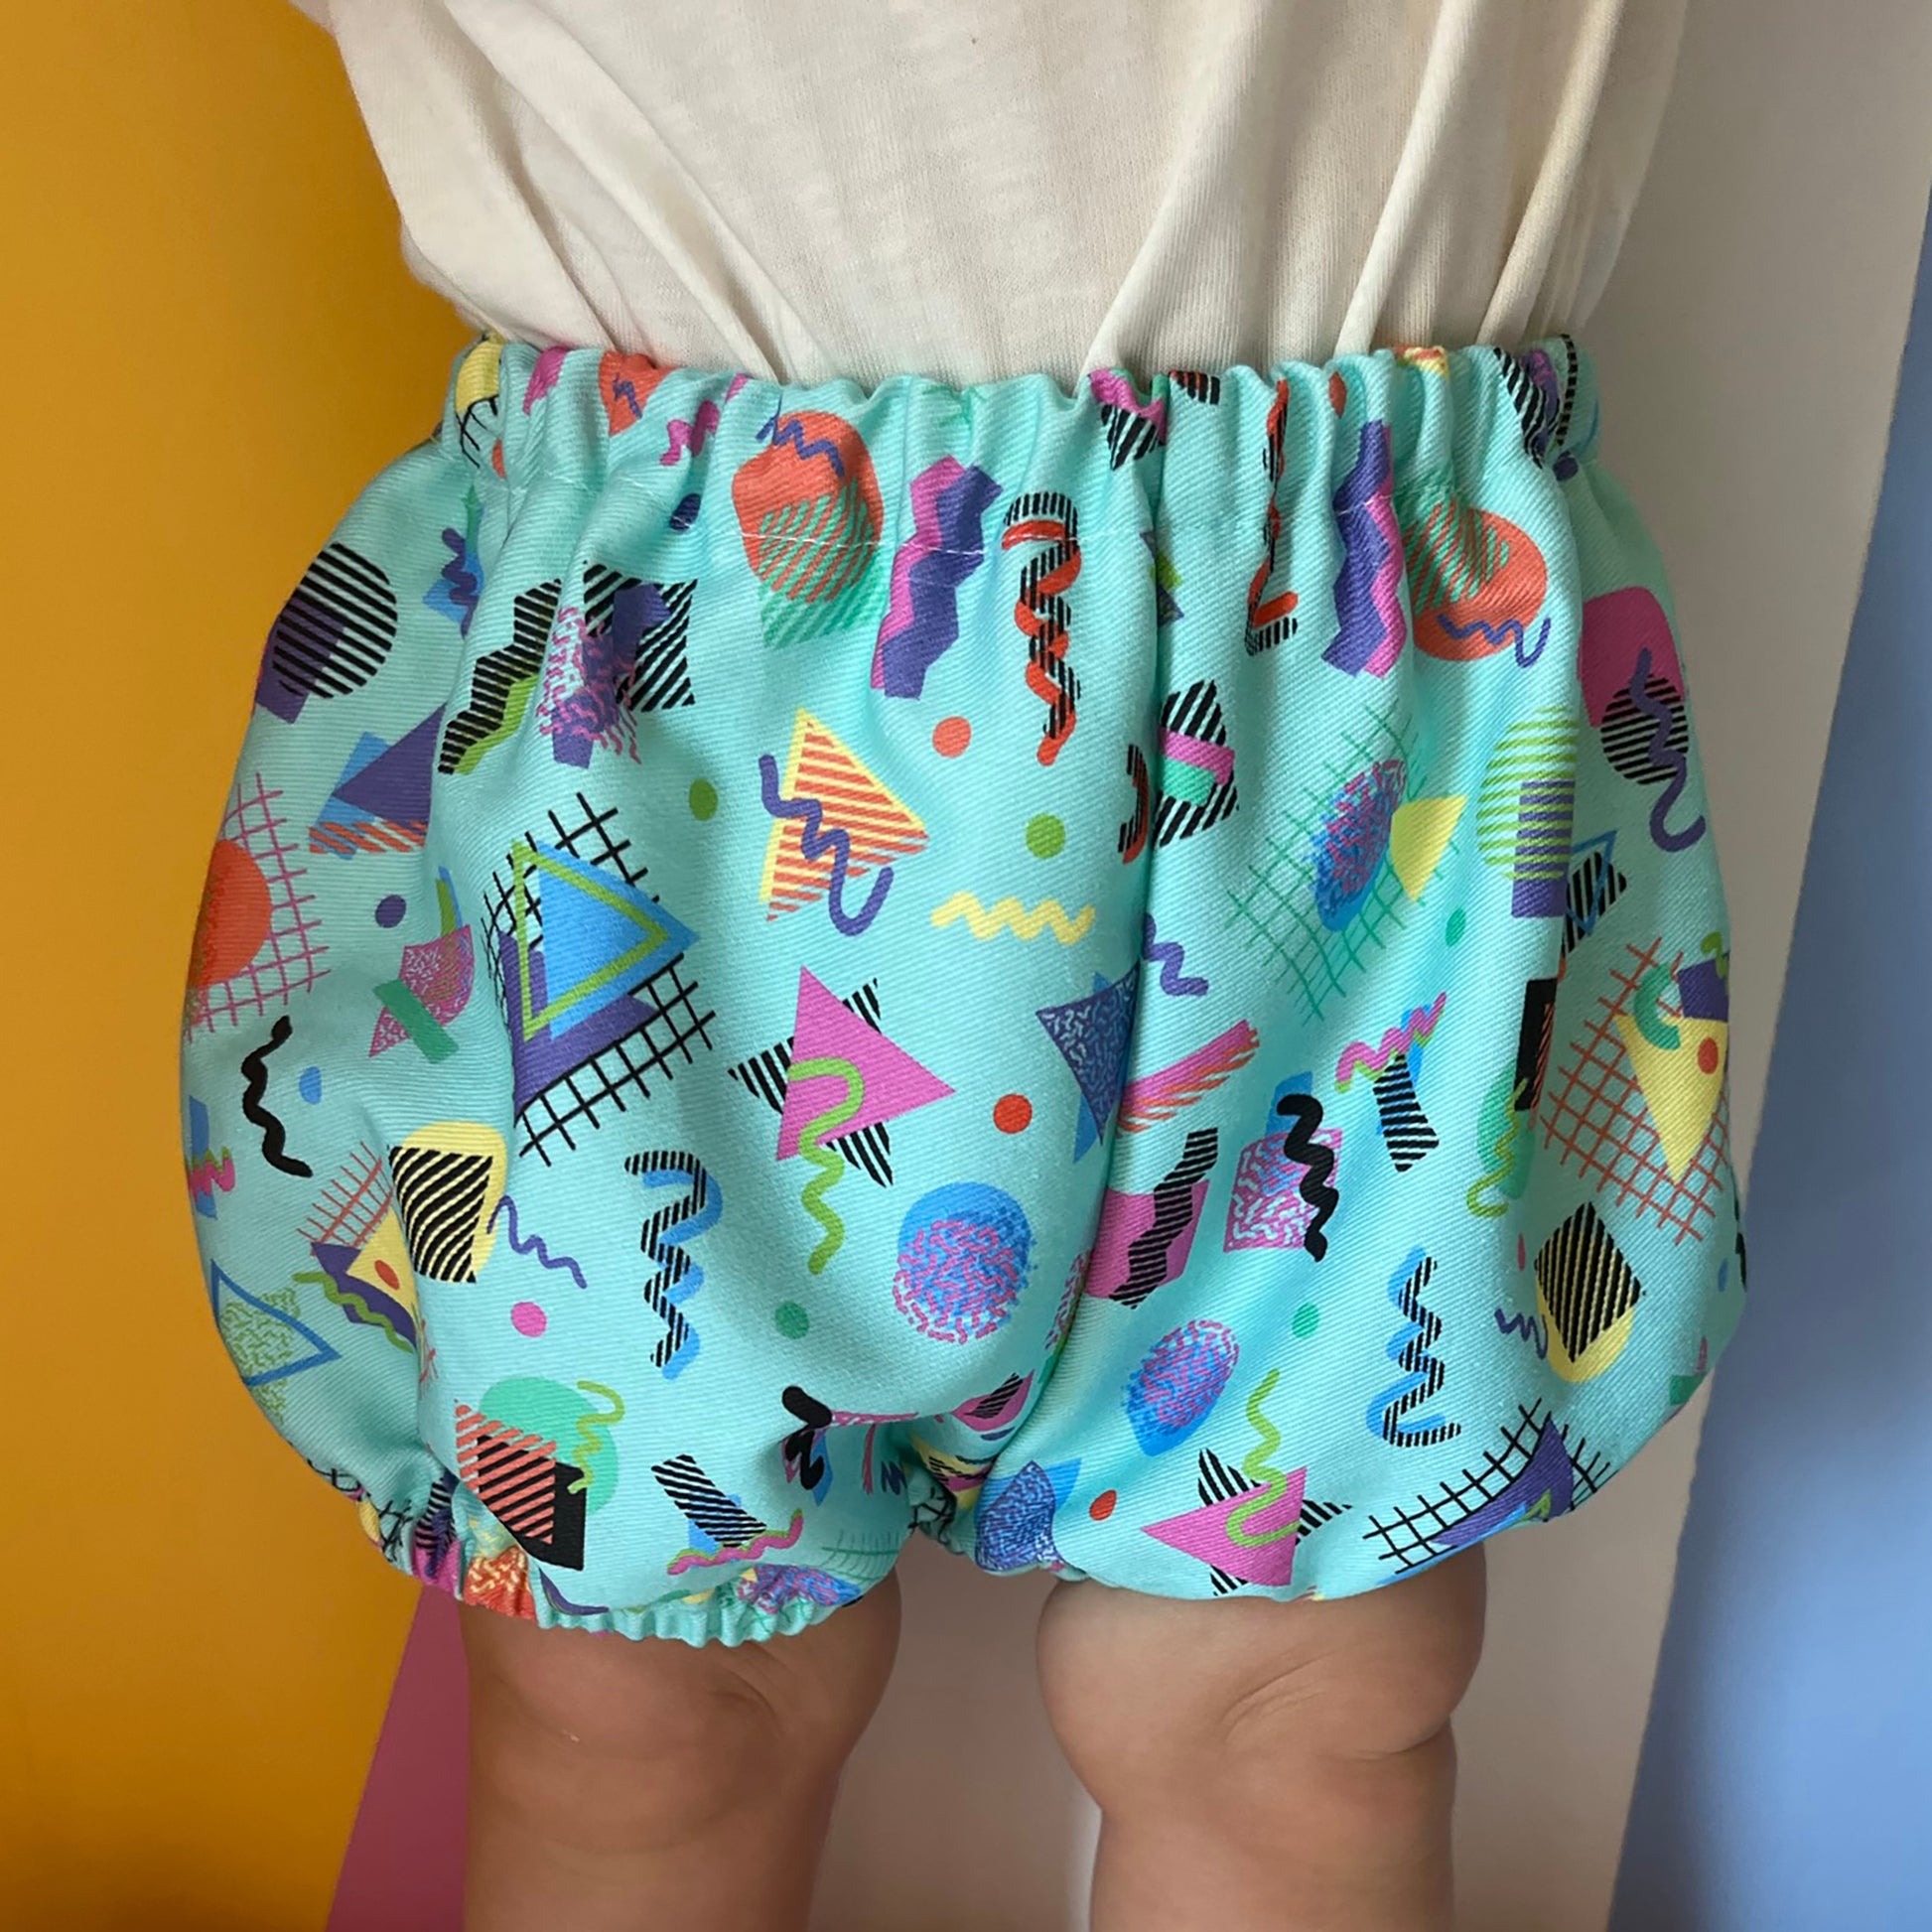 The Bubble Butt Pants in 80s Vibe